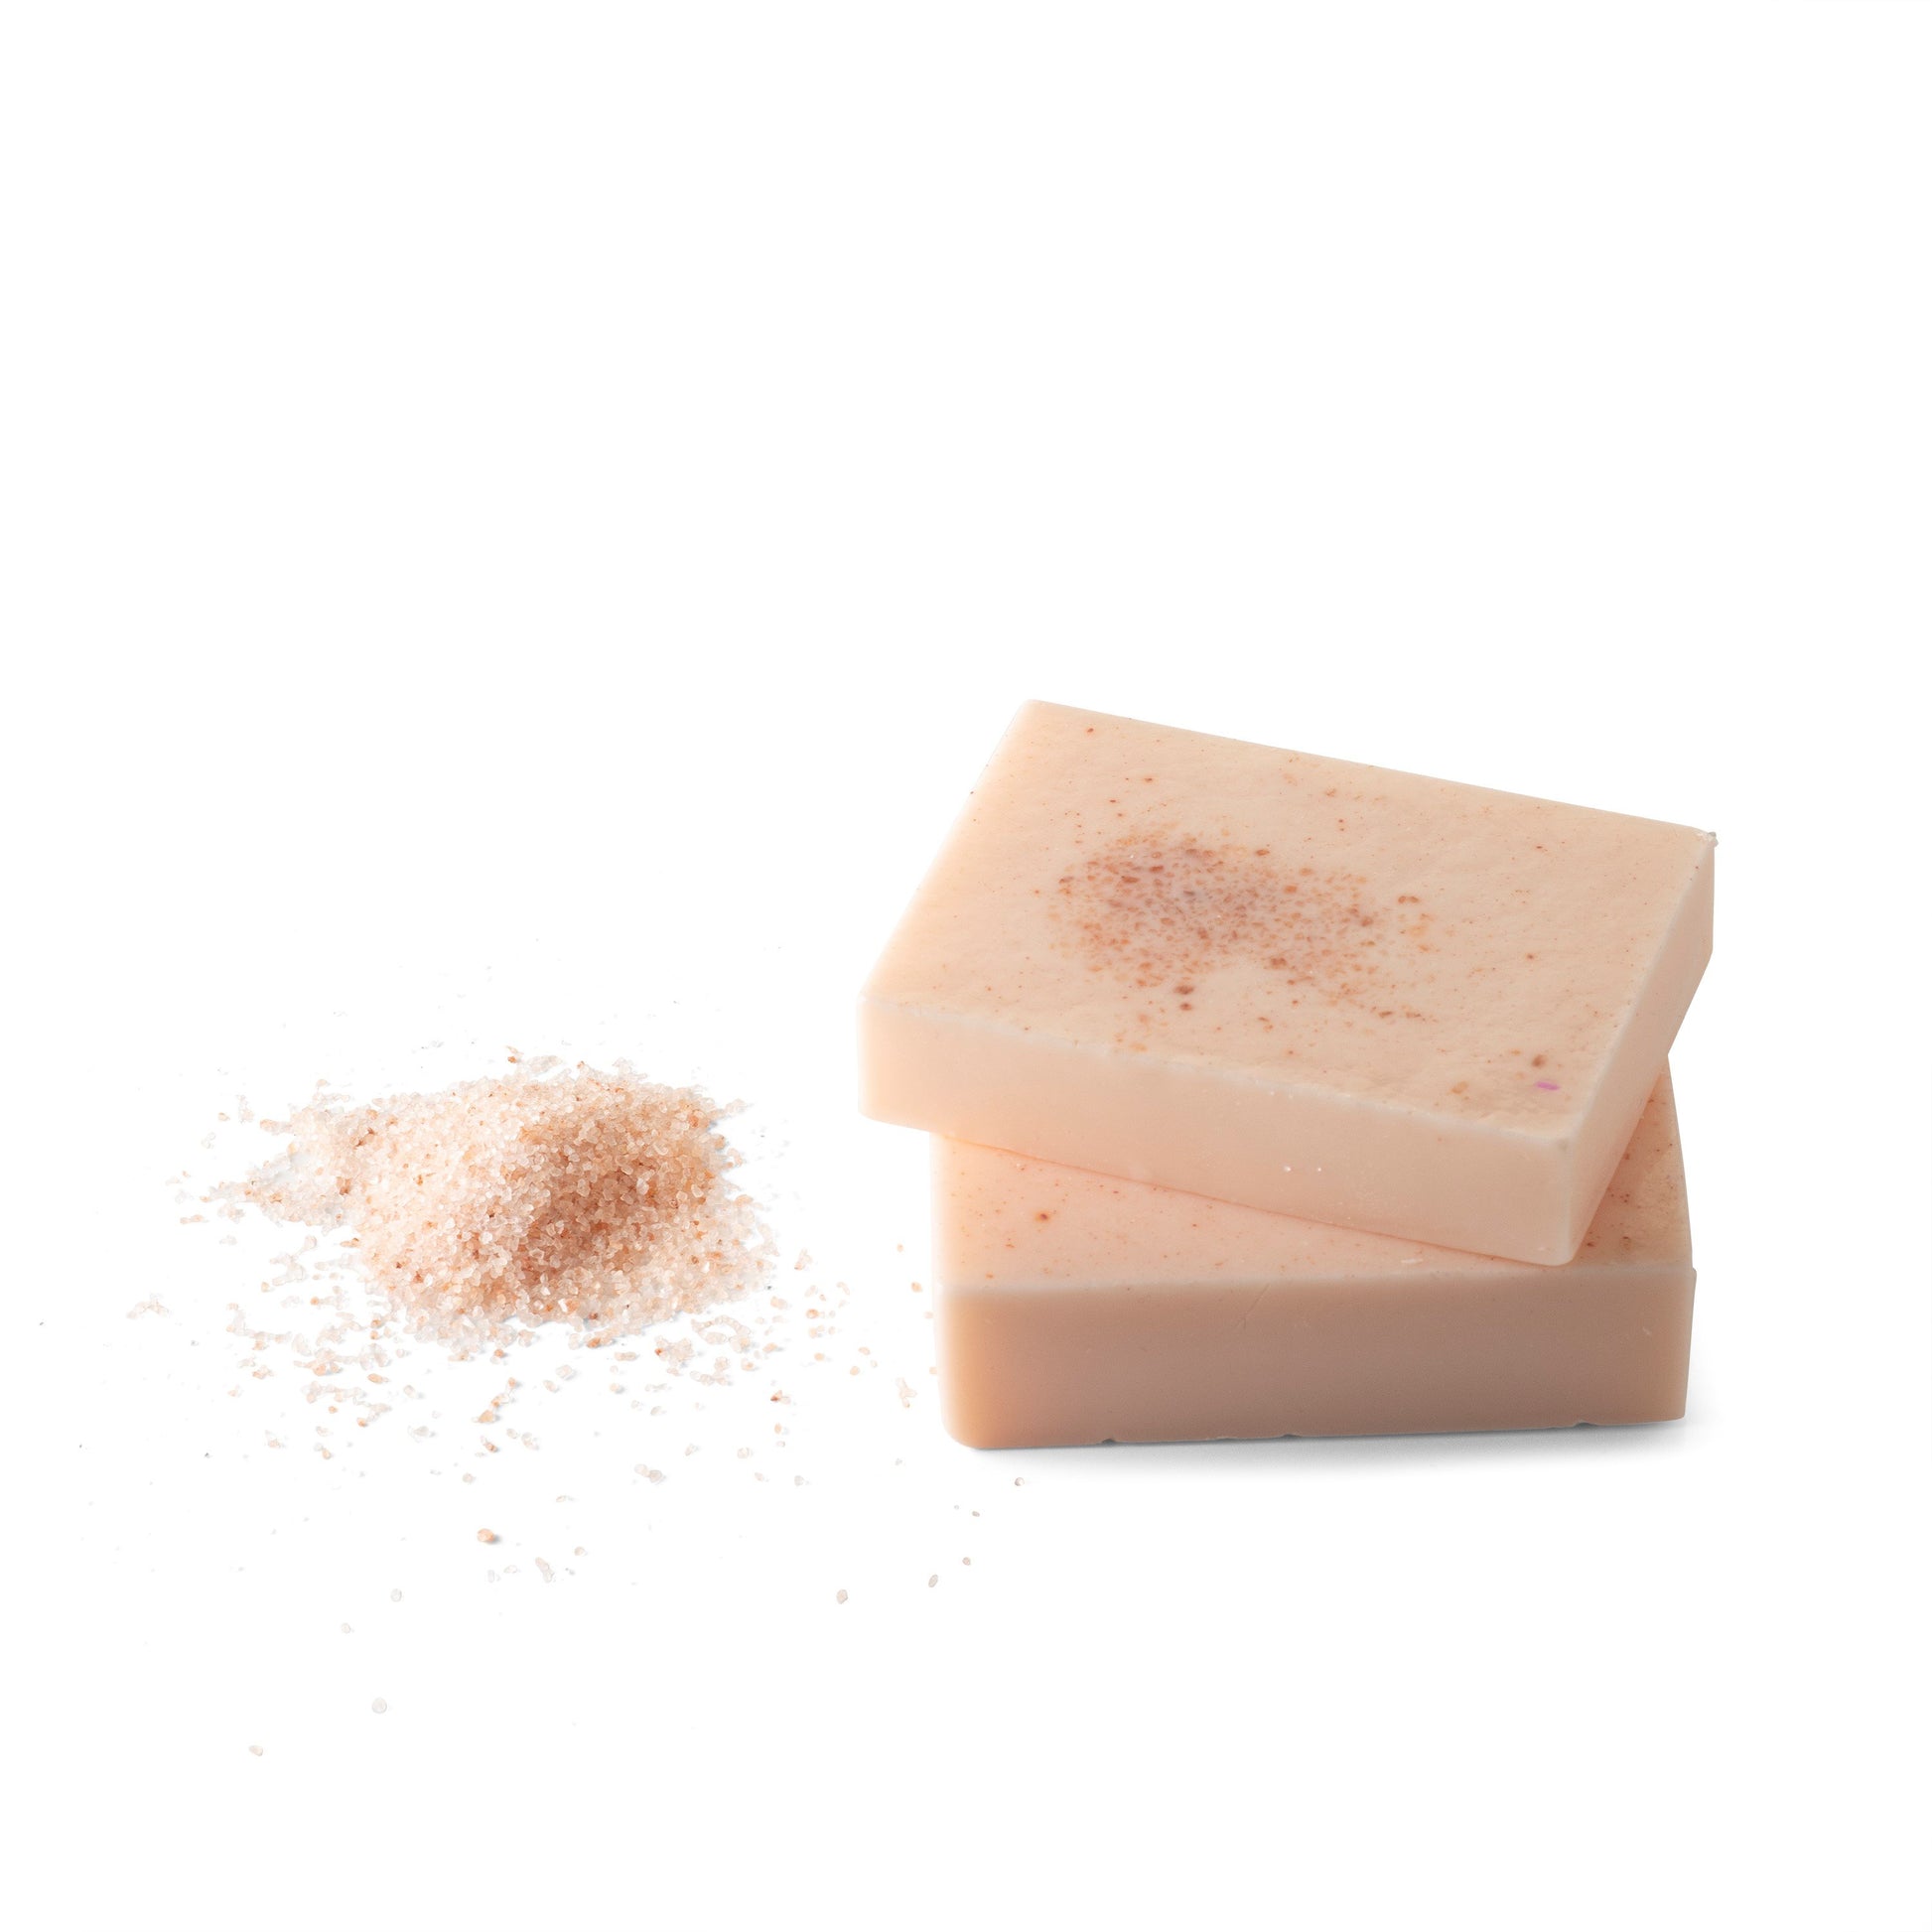 An image of the sea salt body soap next to a handful of sea salt on a white background